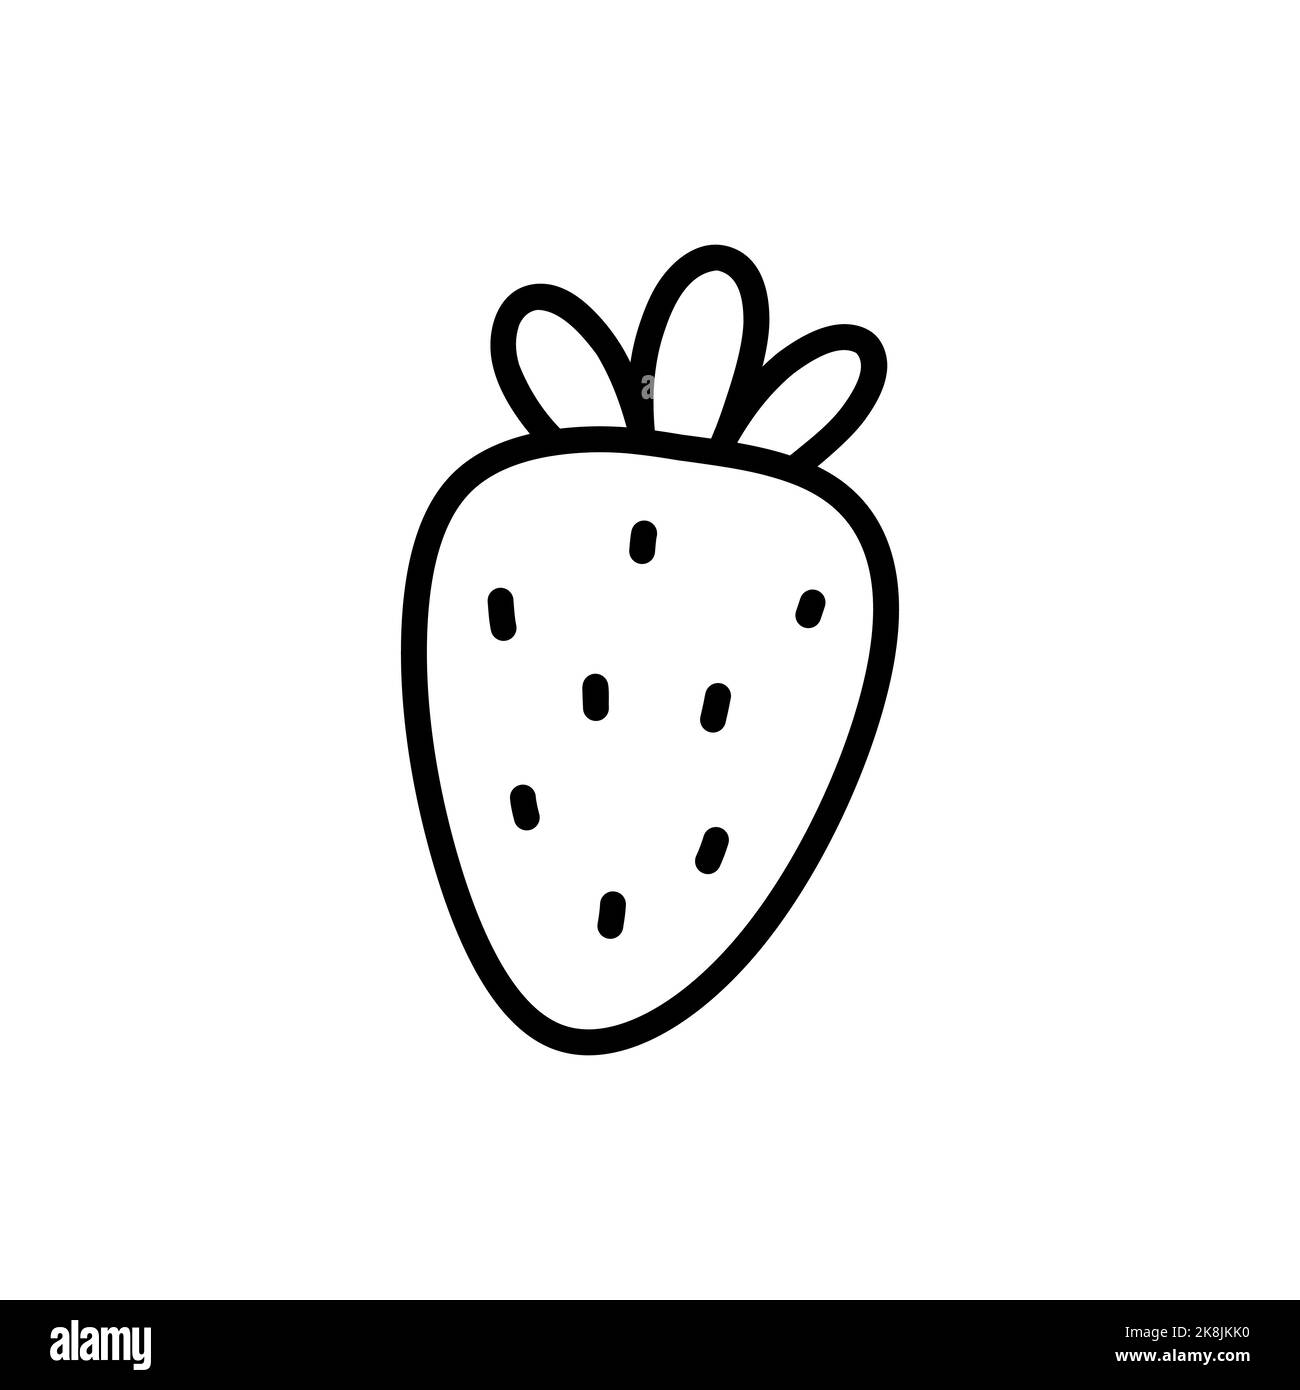 Cute strawberry isolated on white background. Vector hand-drawn illustration in doodle style. Perfect for cards, logo, decorations, recipes, menu Stock Vector